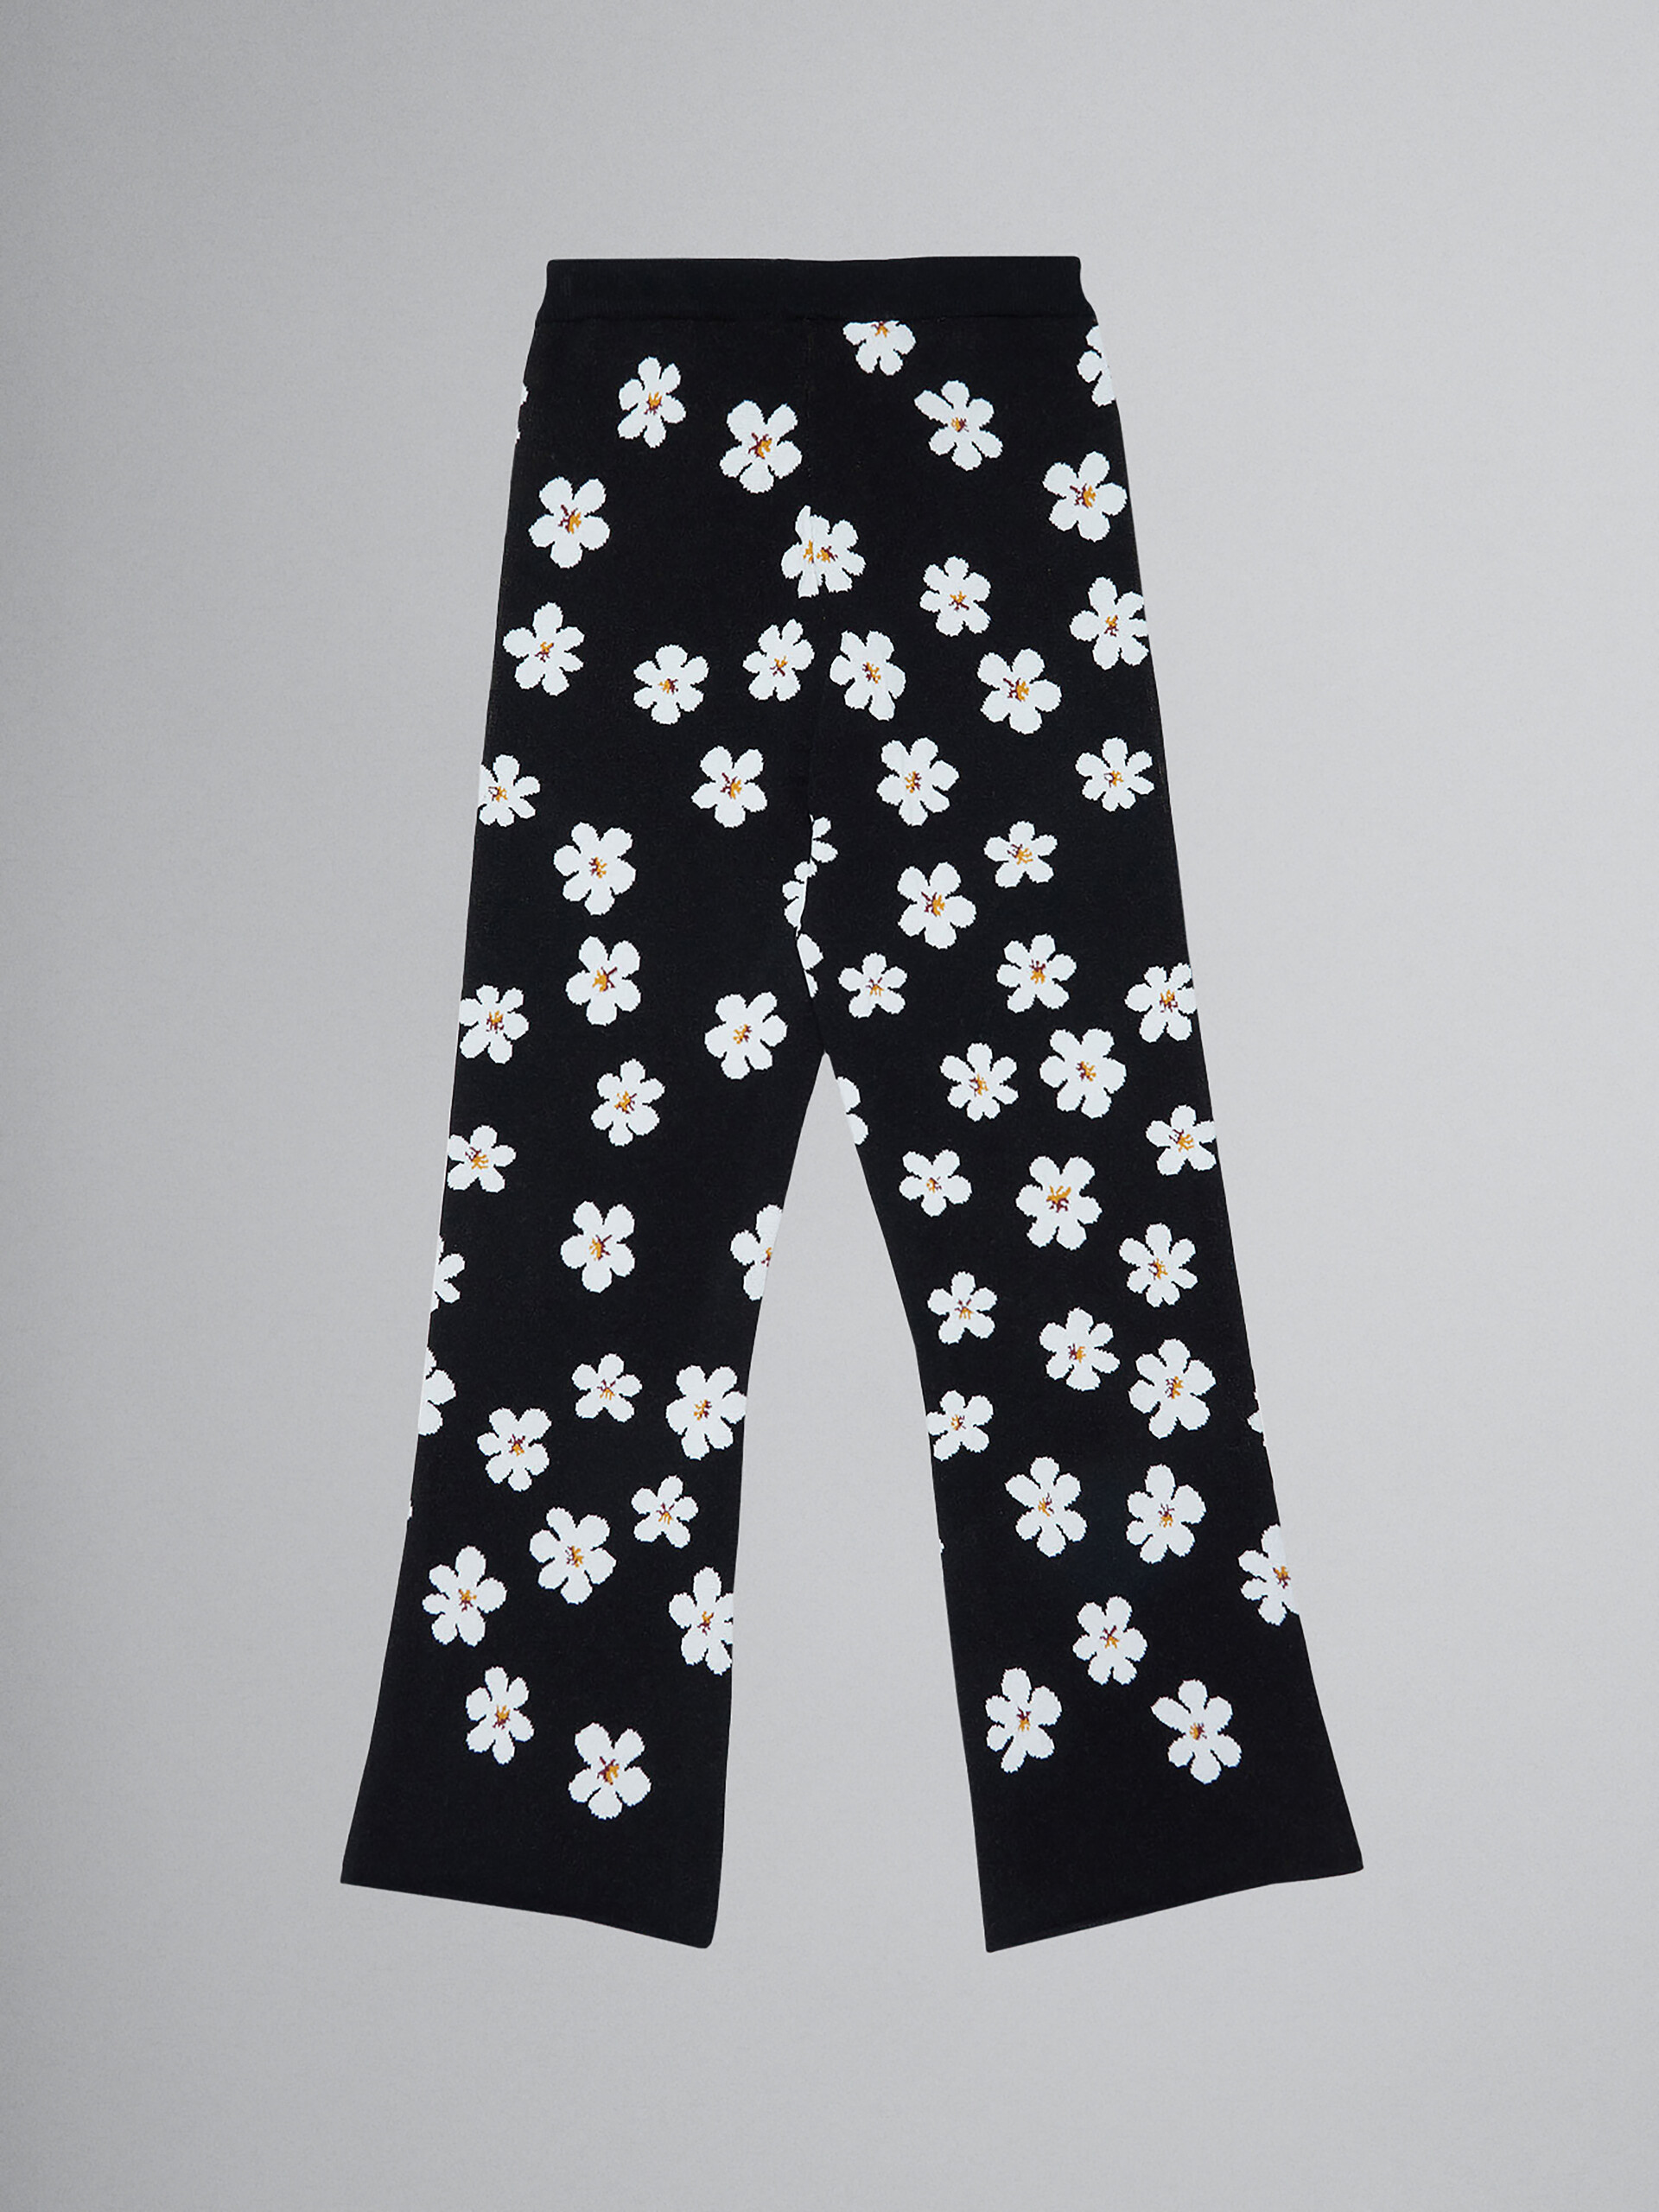 Black trousers with jacquard Daisy motif - Pants - Image 2